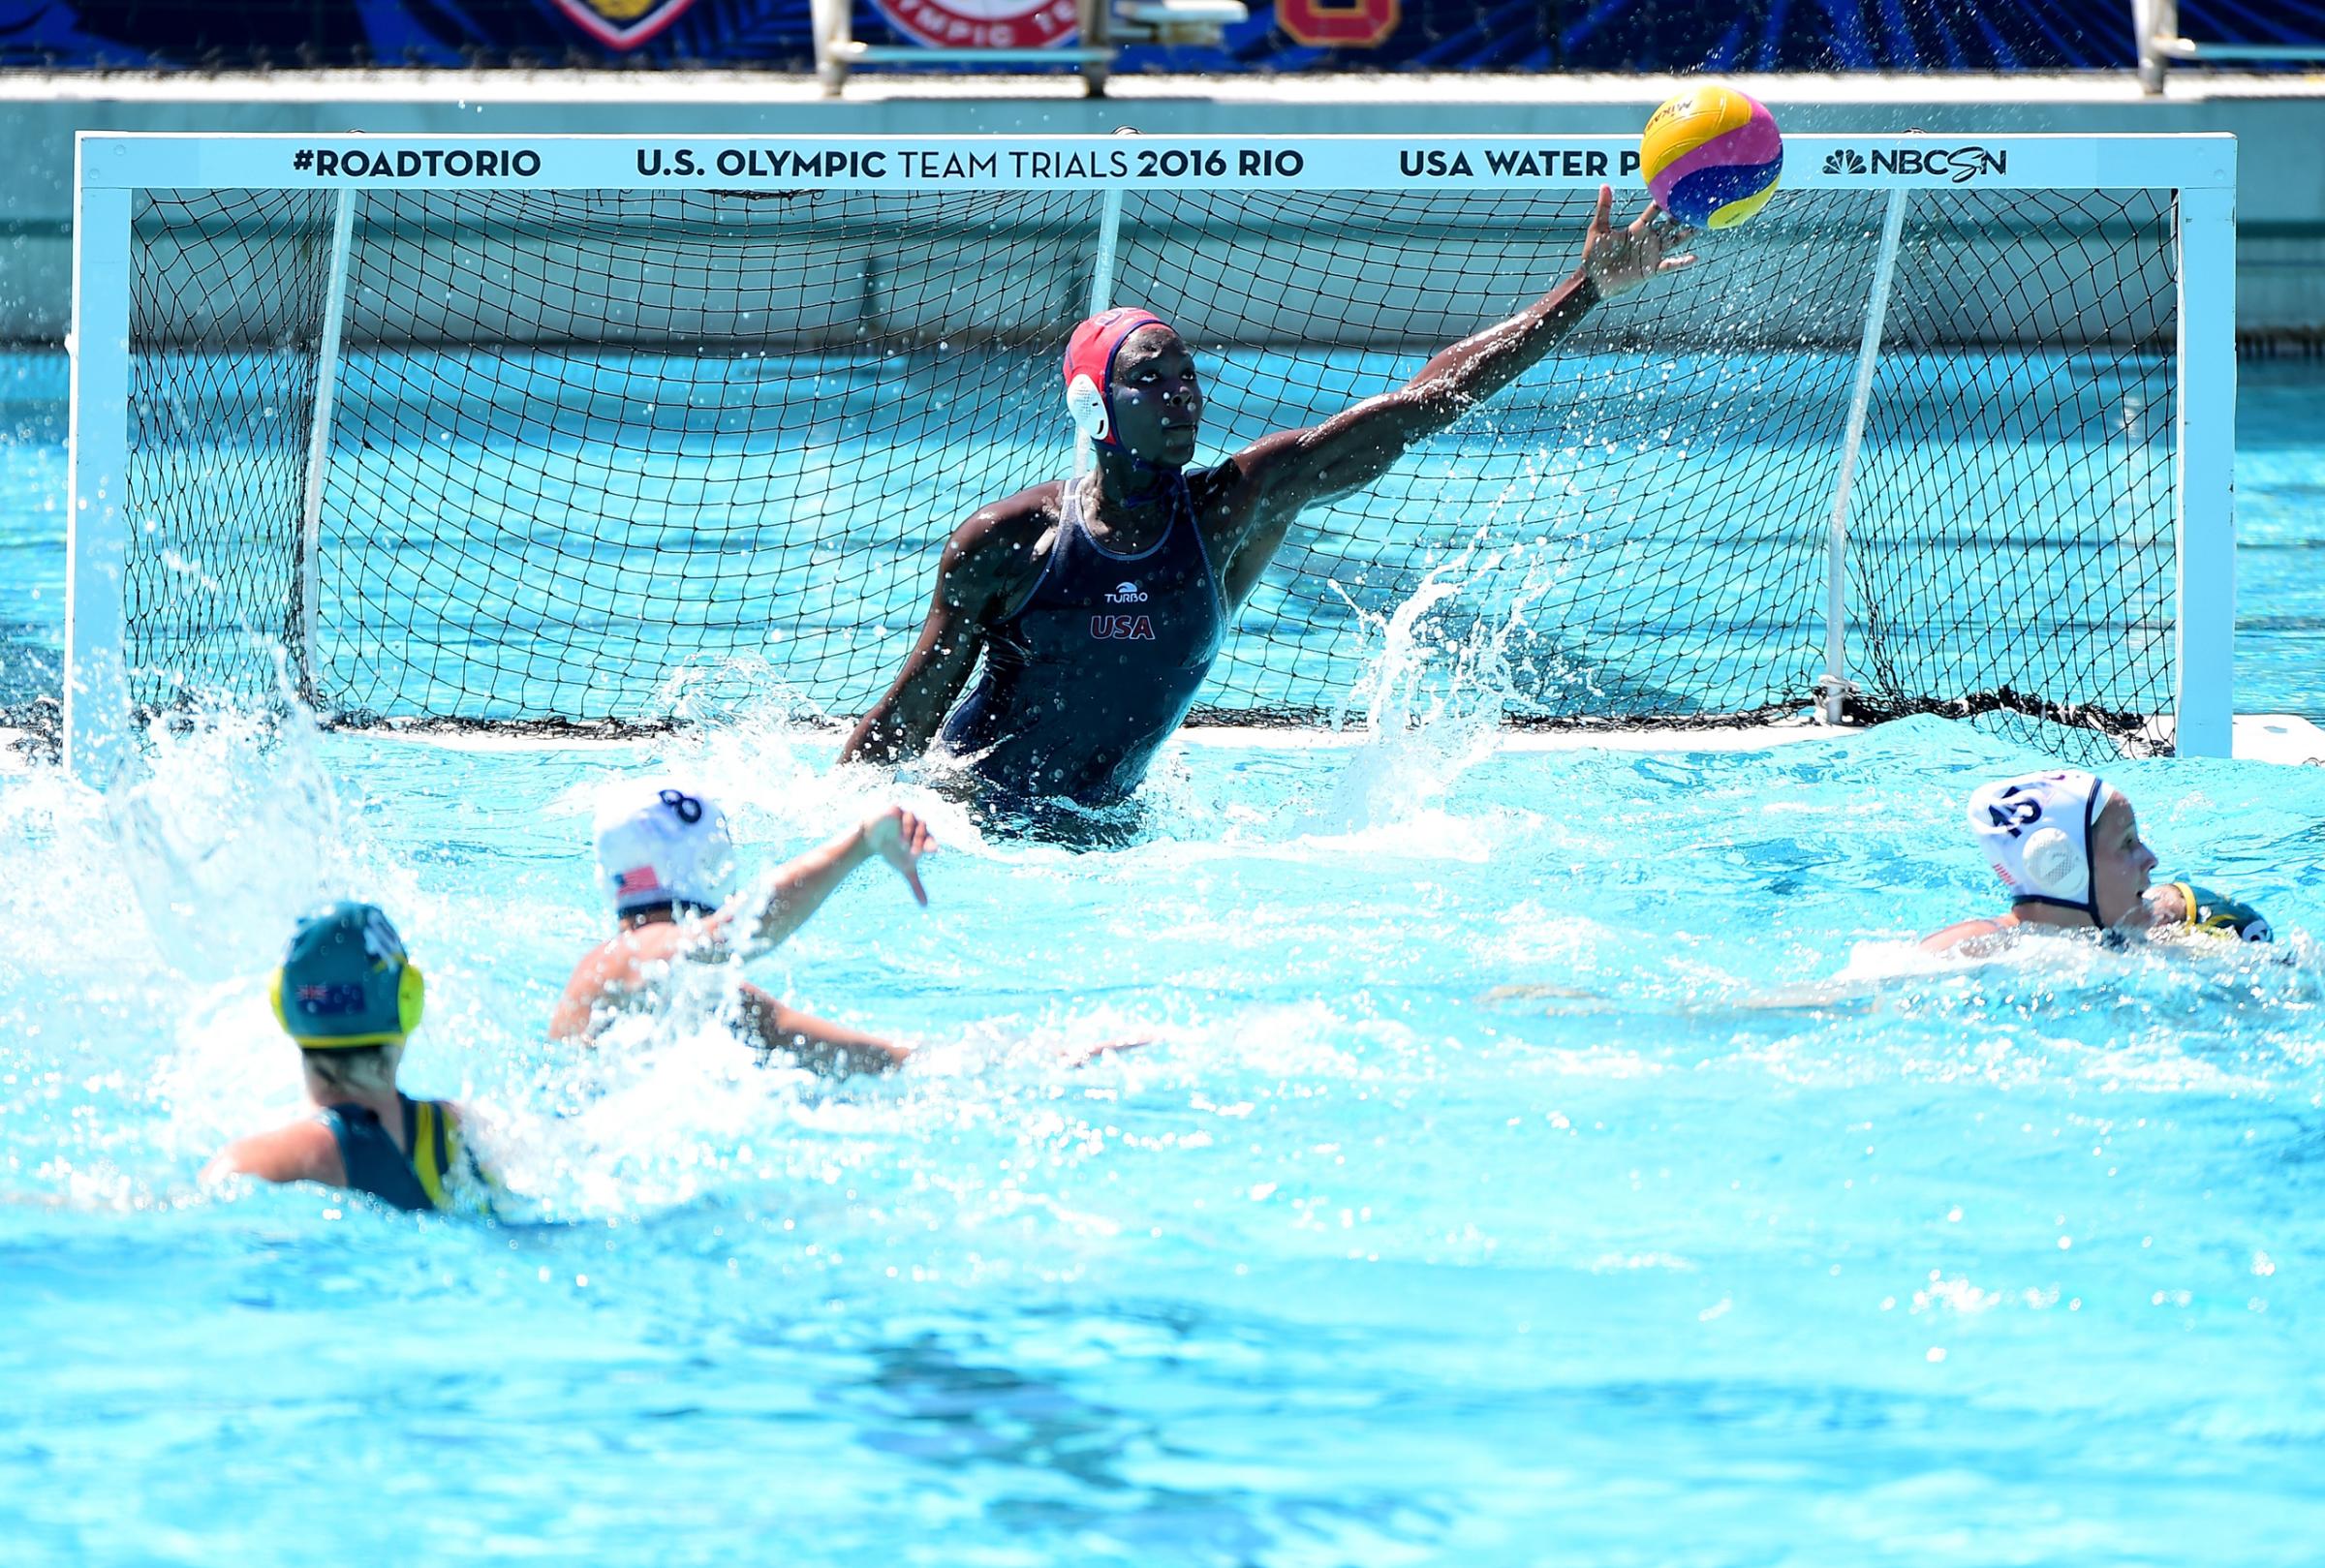 Ashleigh Johnson—Johnson, a rangy goalkeeper who learned the game at a Miami-area community pool, will be the first black American woman to compete in Olympic water polo. The favored U.S. team owns every major title in the sport.